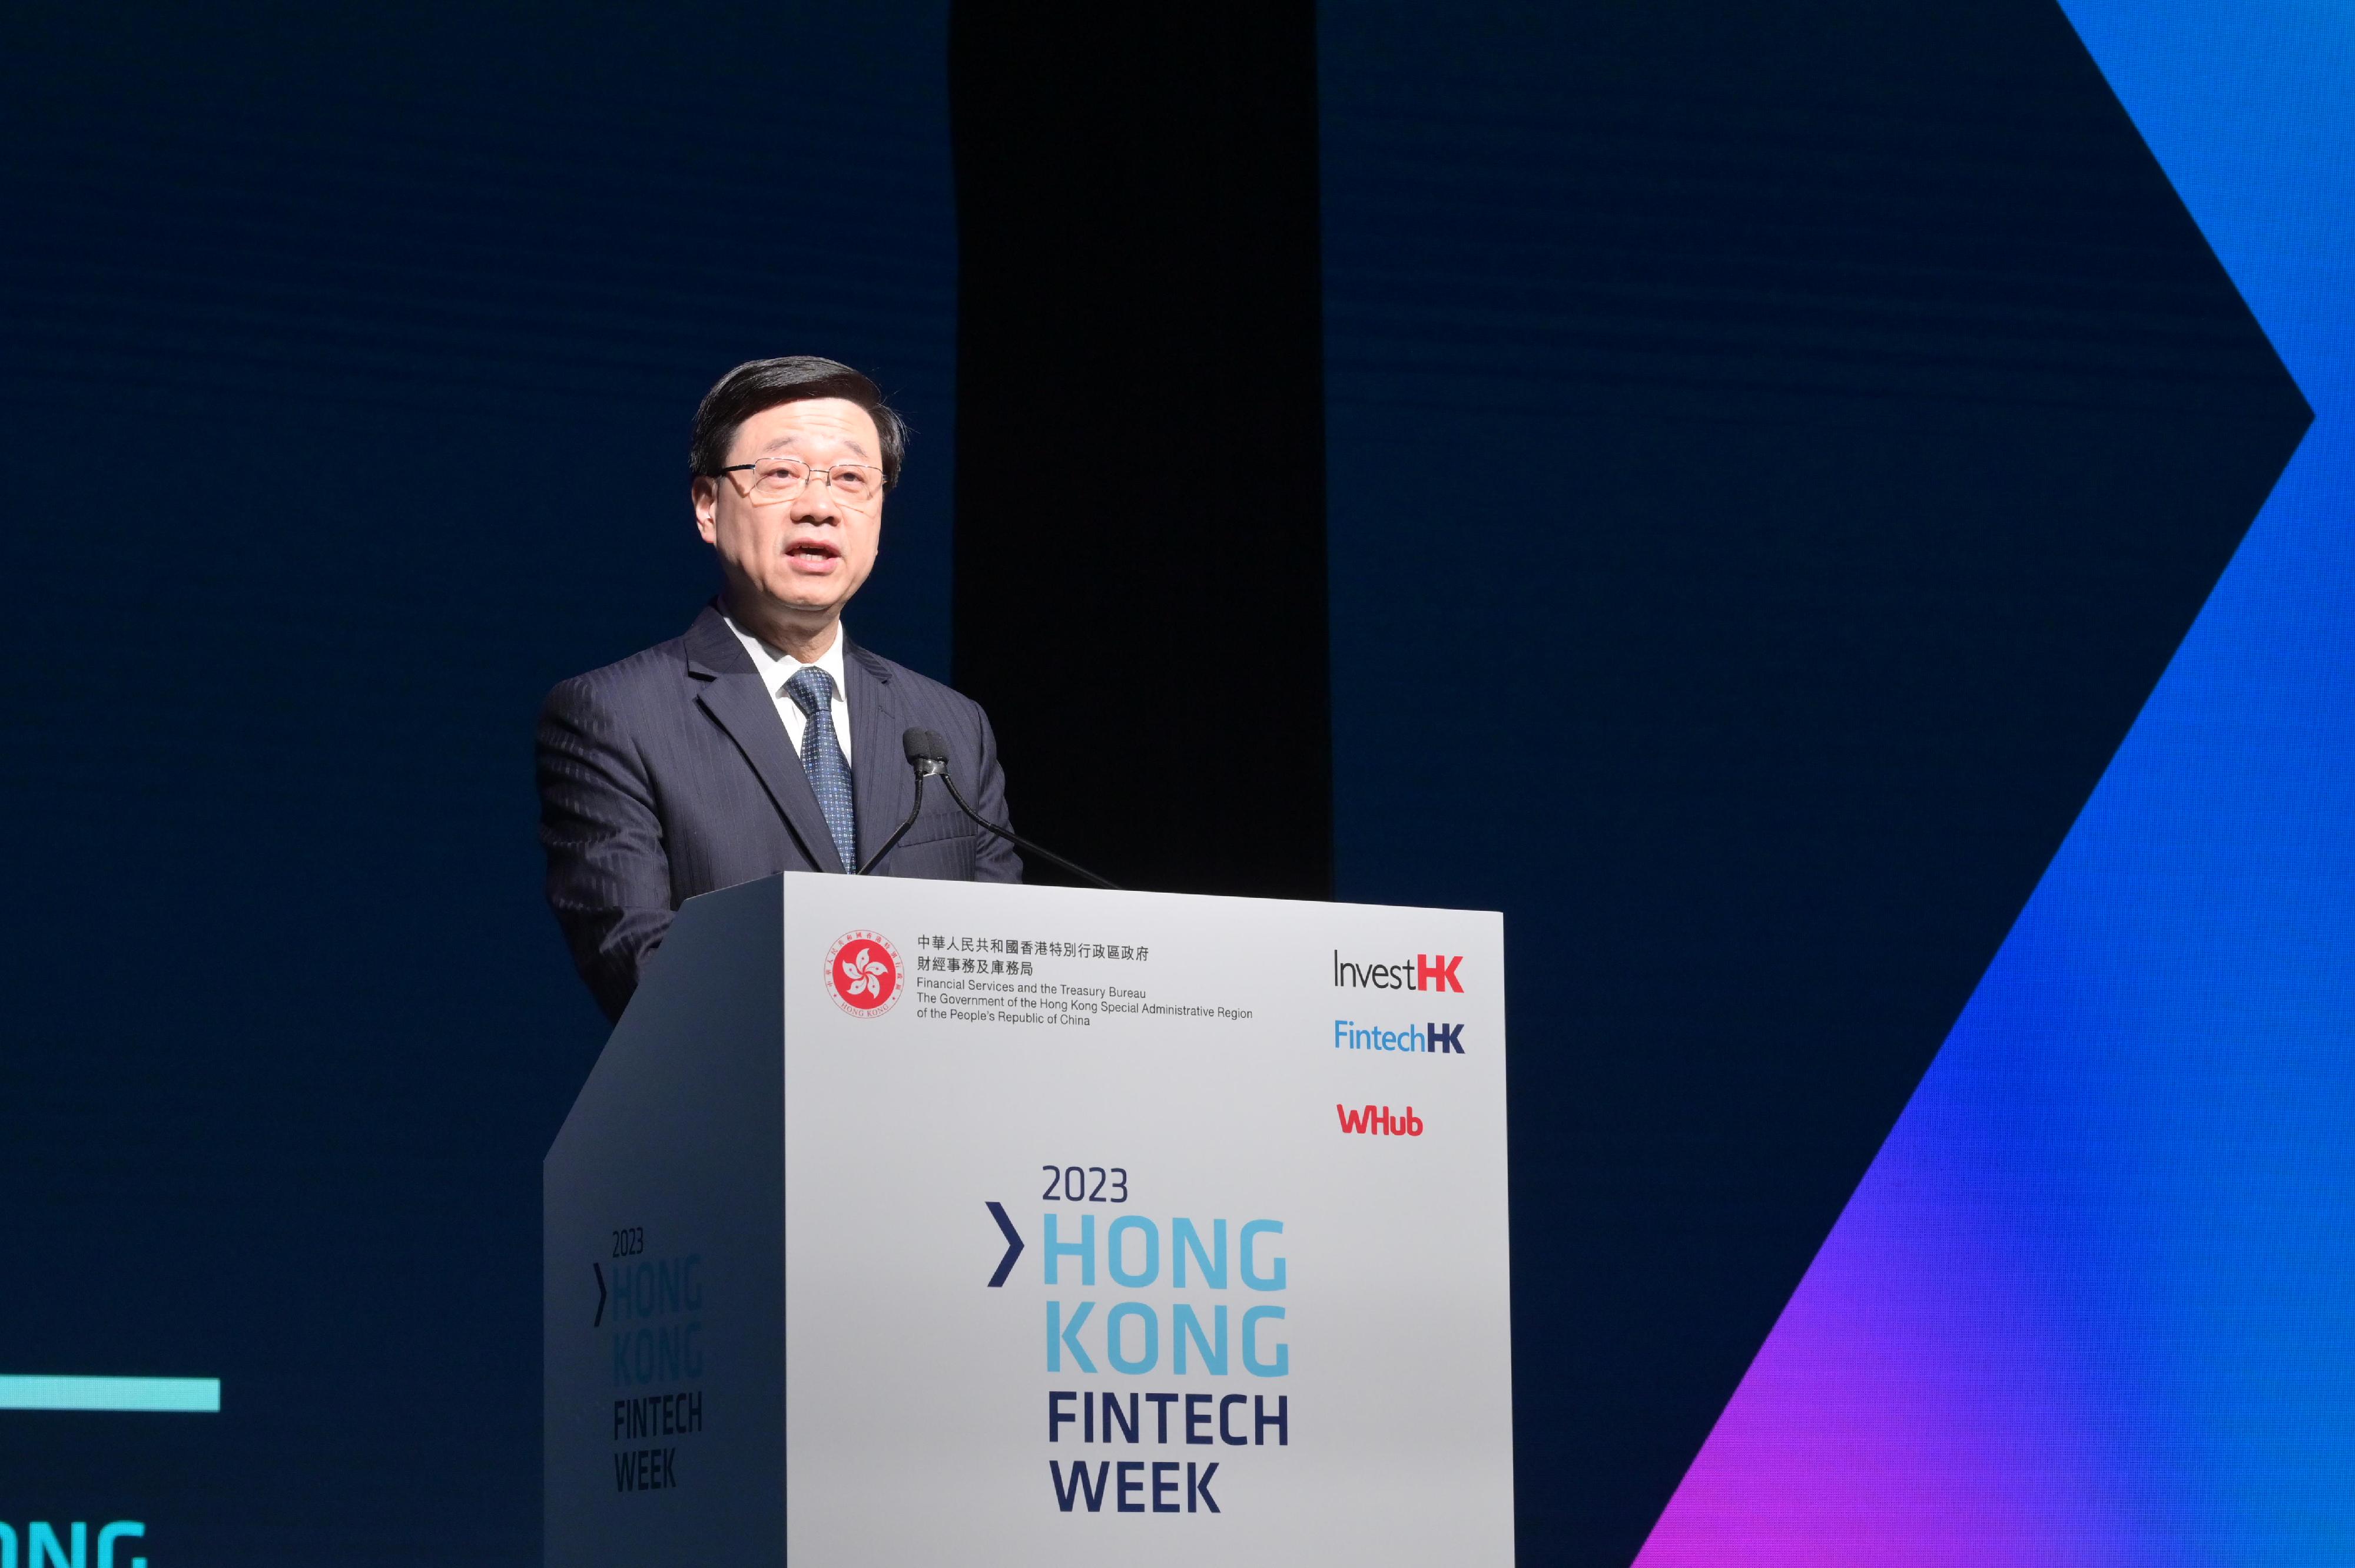 Hong Kong FinTech Week 2023 concluded on November 5, capping off a week-long feast of fintech that included the Greater Bay Area Day on October 31 and the two-day main conference on November 2 and 3. Photo shows the Chief Executive, Mr John Lee, speaking at Hong Kong FinTech Week 2023 on November 2.